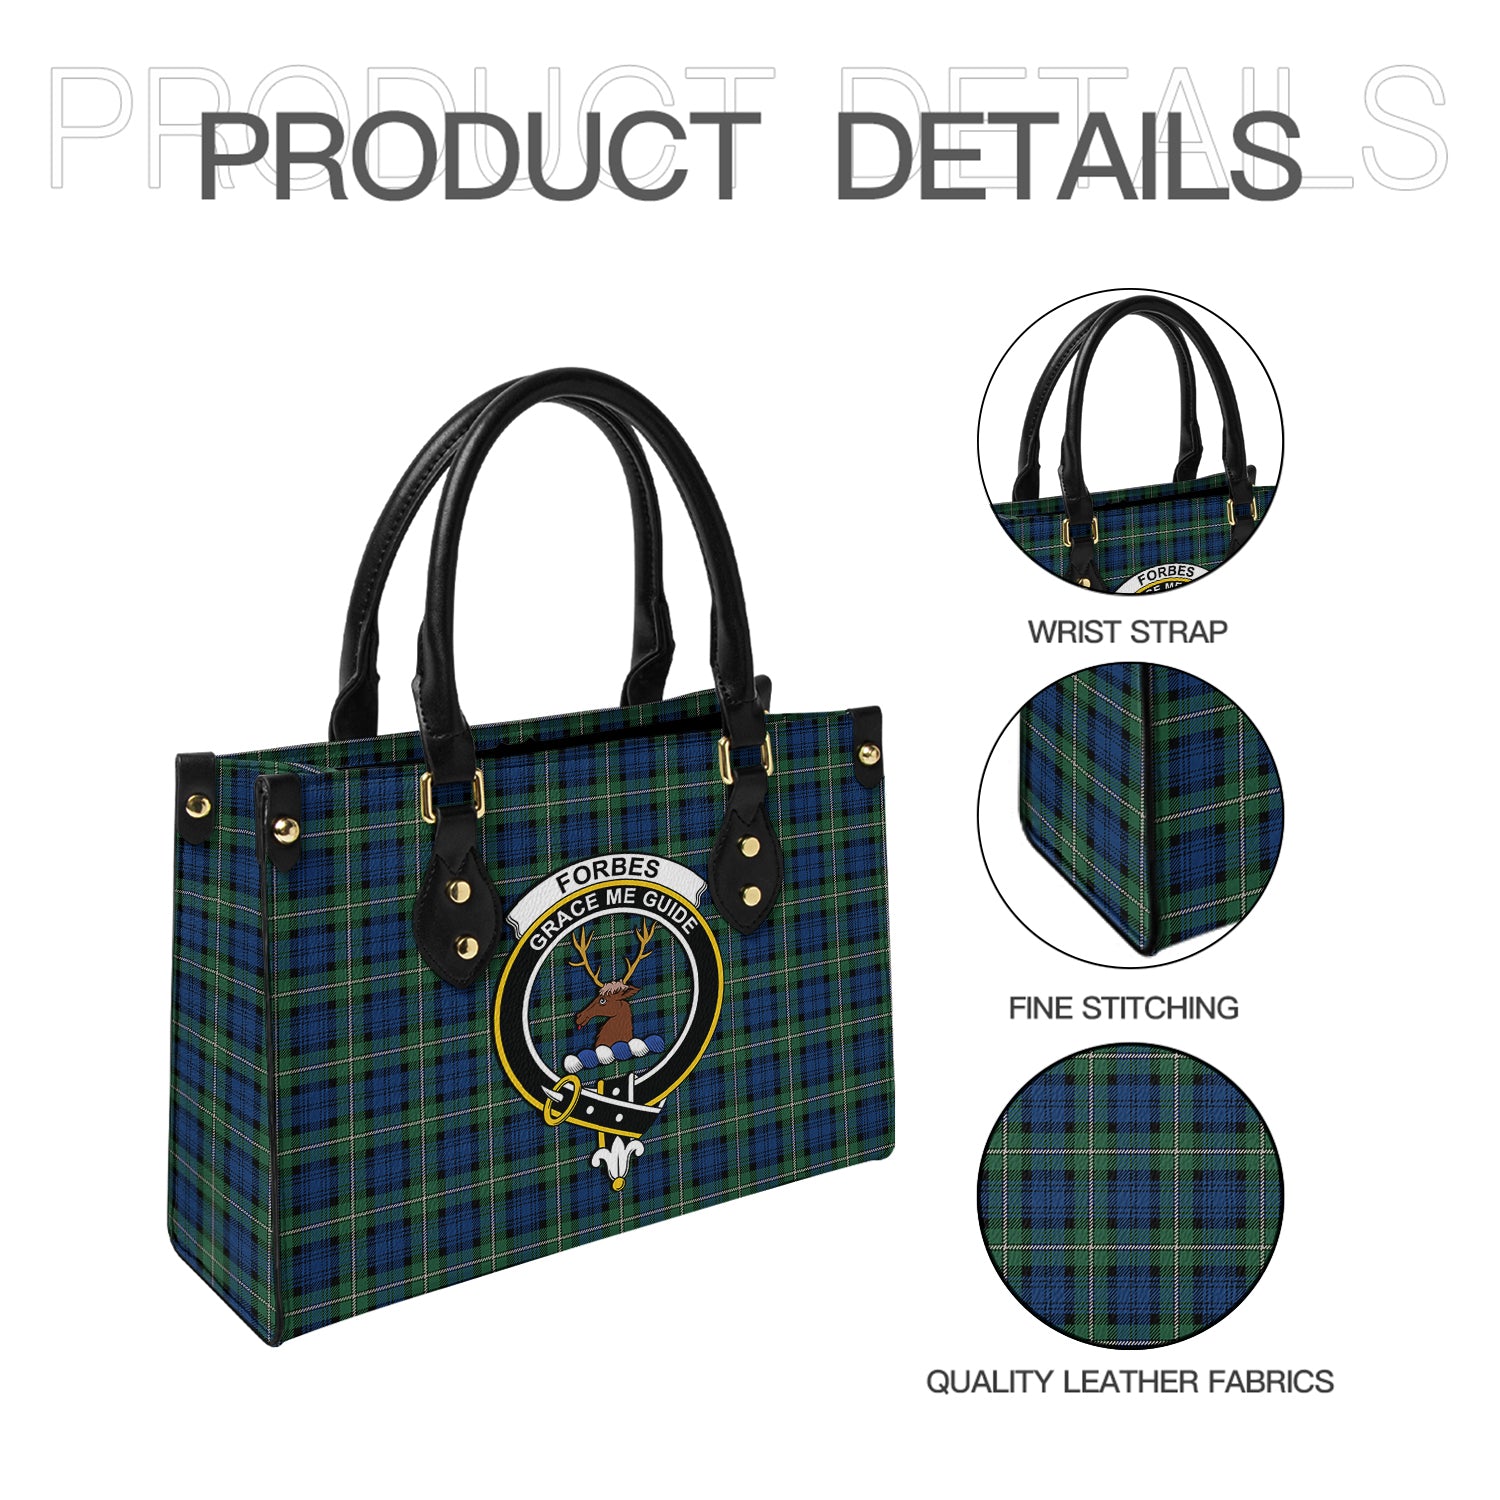 forbes-ancient-tartan-leather-bag-with-family-crest